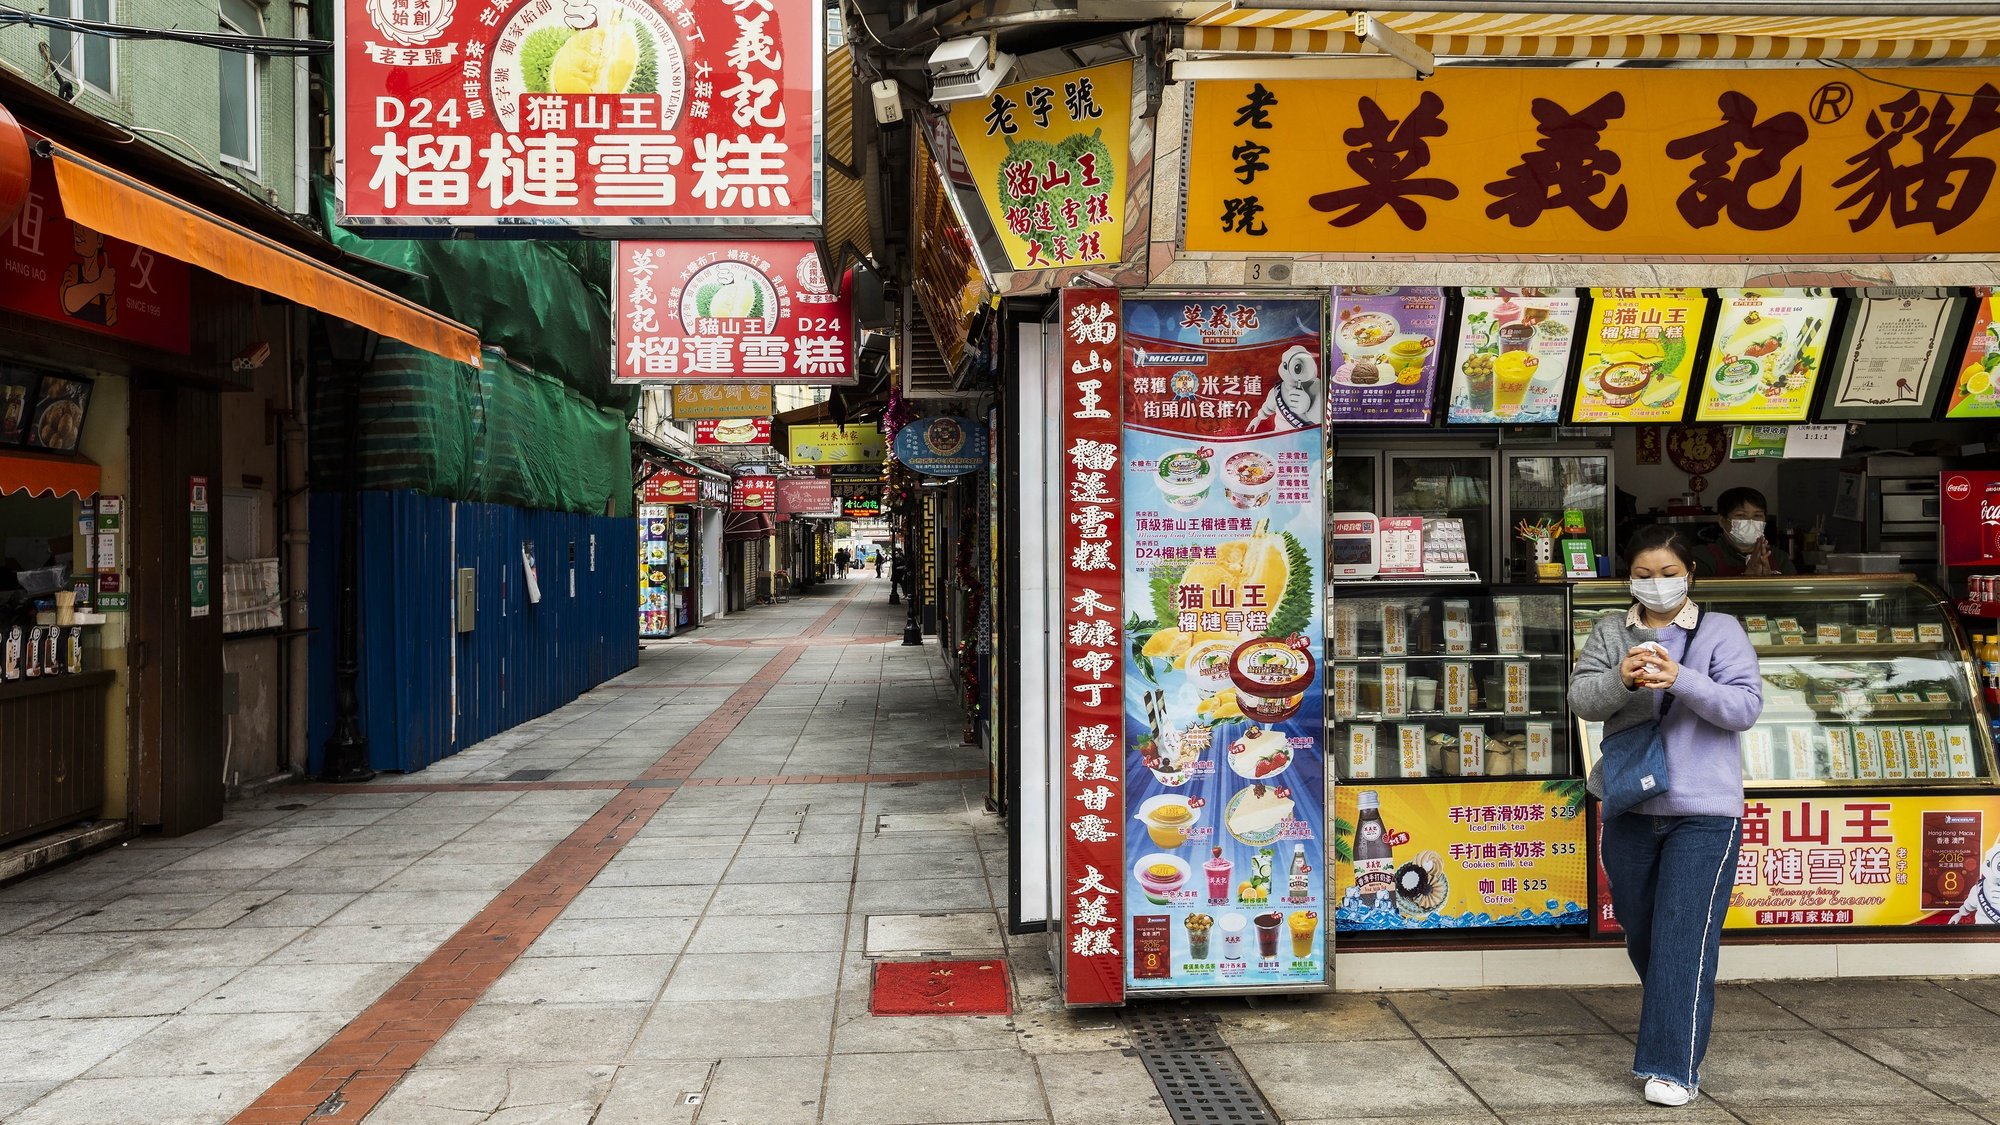 An open food store in an empty street in Macao, China, 07 February 2020. The coronavirus outbreak is contaminating local Portuguese businesses in Macao, robbing customers and hoping to recover, in some cases, the financial health that protests in Hong Kong had already compromised. CARMO CORREIA/LUSA